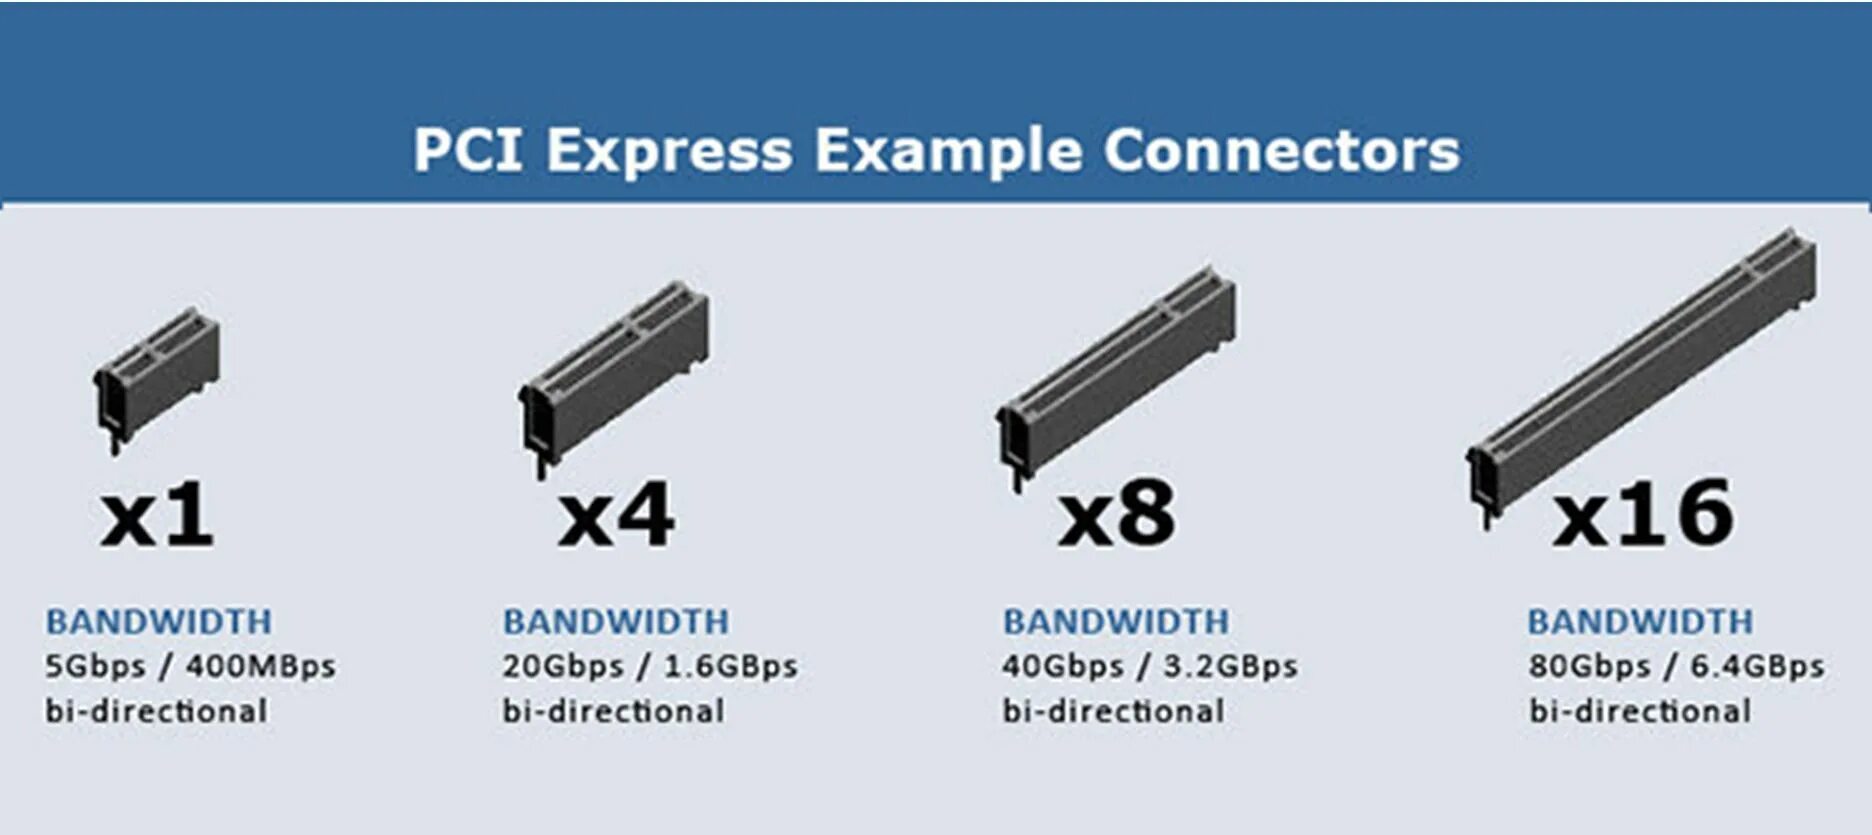 16 connection. PCI Express x4 разъем. Слотов PCI-E 3.0 x16. Слотов PCI-E 5.0 x16. Слот PCI Express x16.